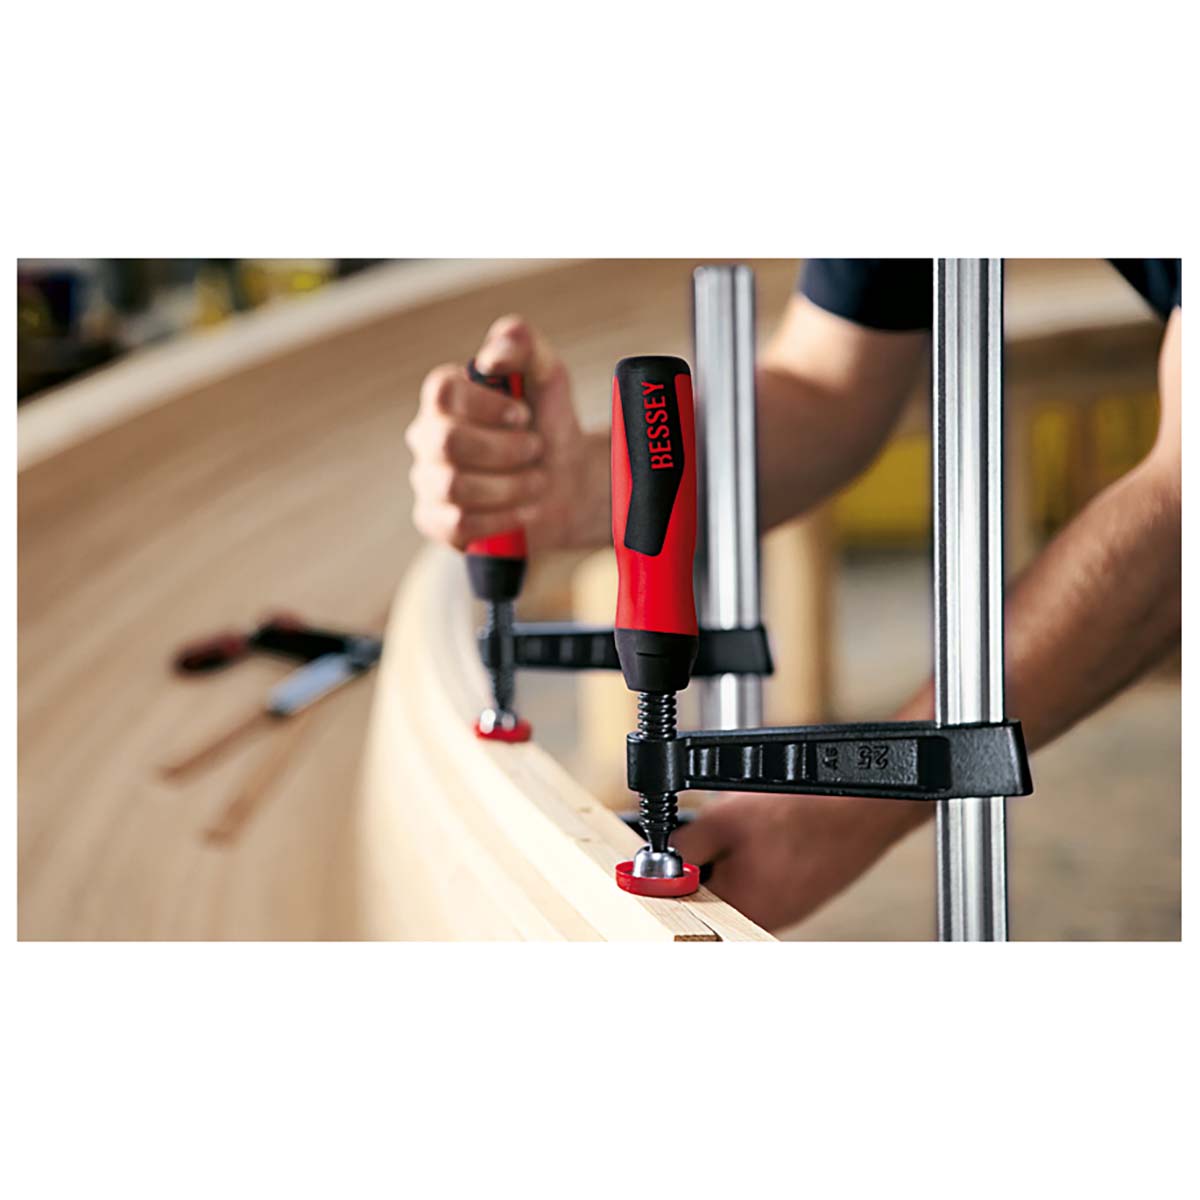 Bessey TG100S17-2K - Tightening screw with two-component handle Bessey TG 1000/175